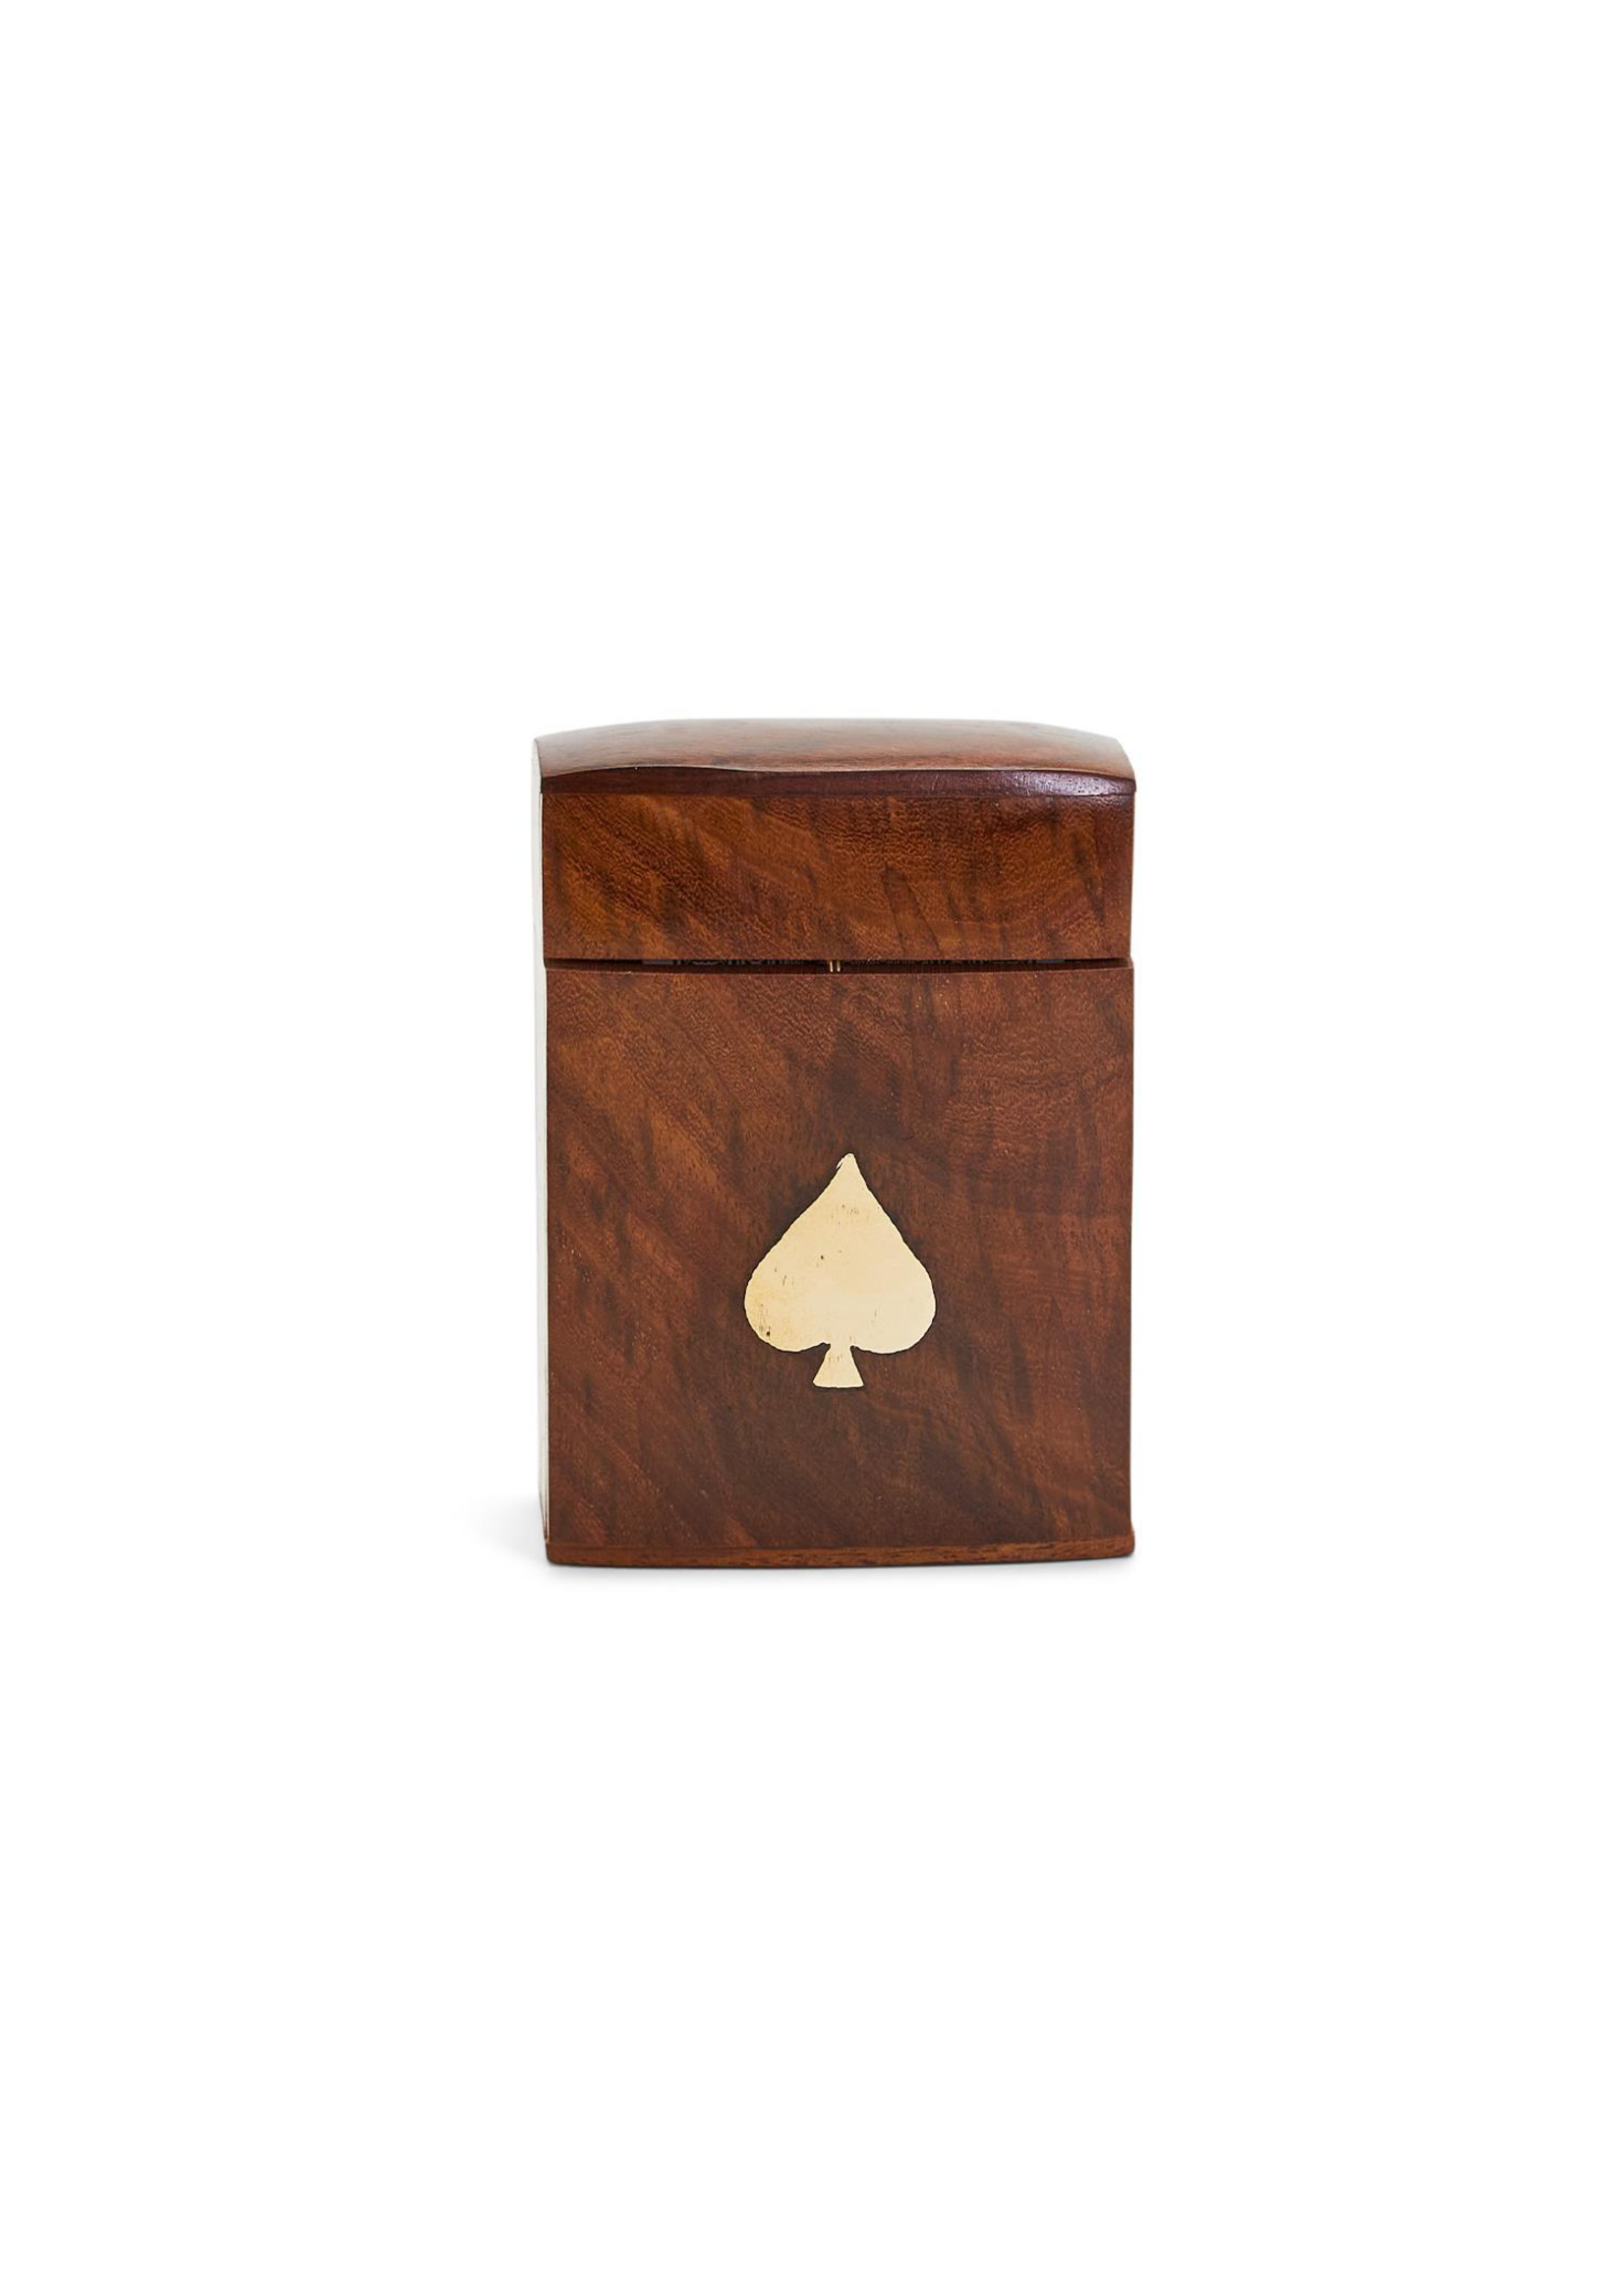 Two's Company, Inc. Wood Crafted Playing Card Set in Wooden Box